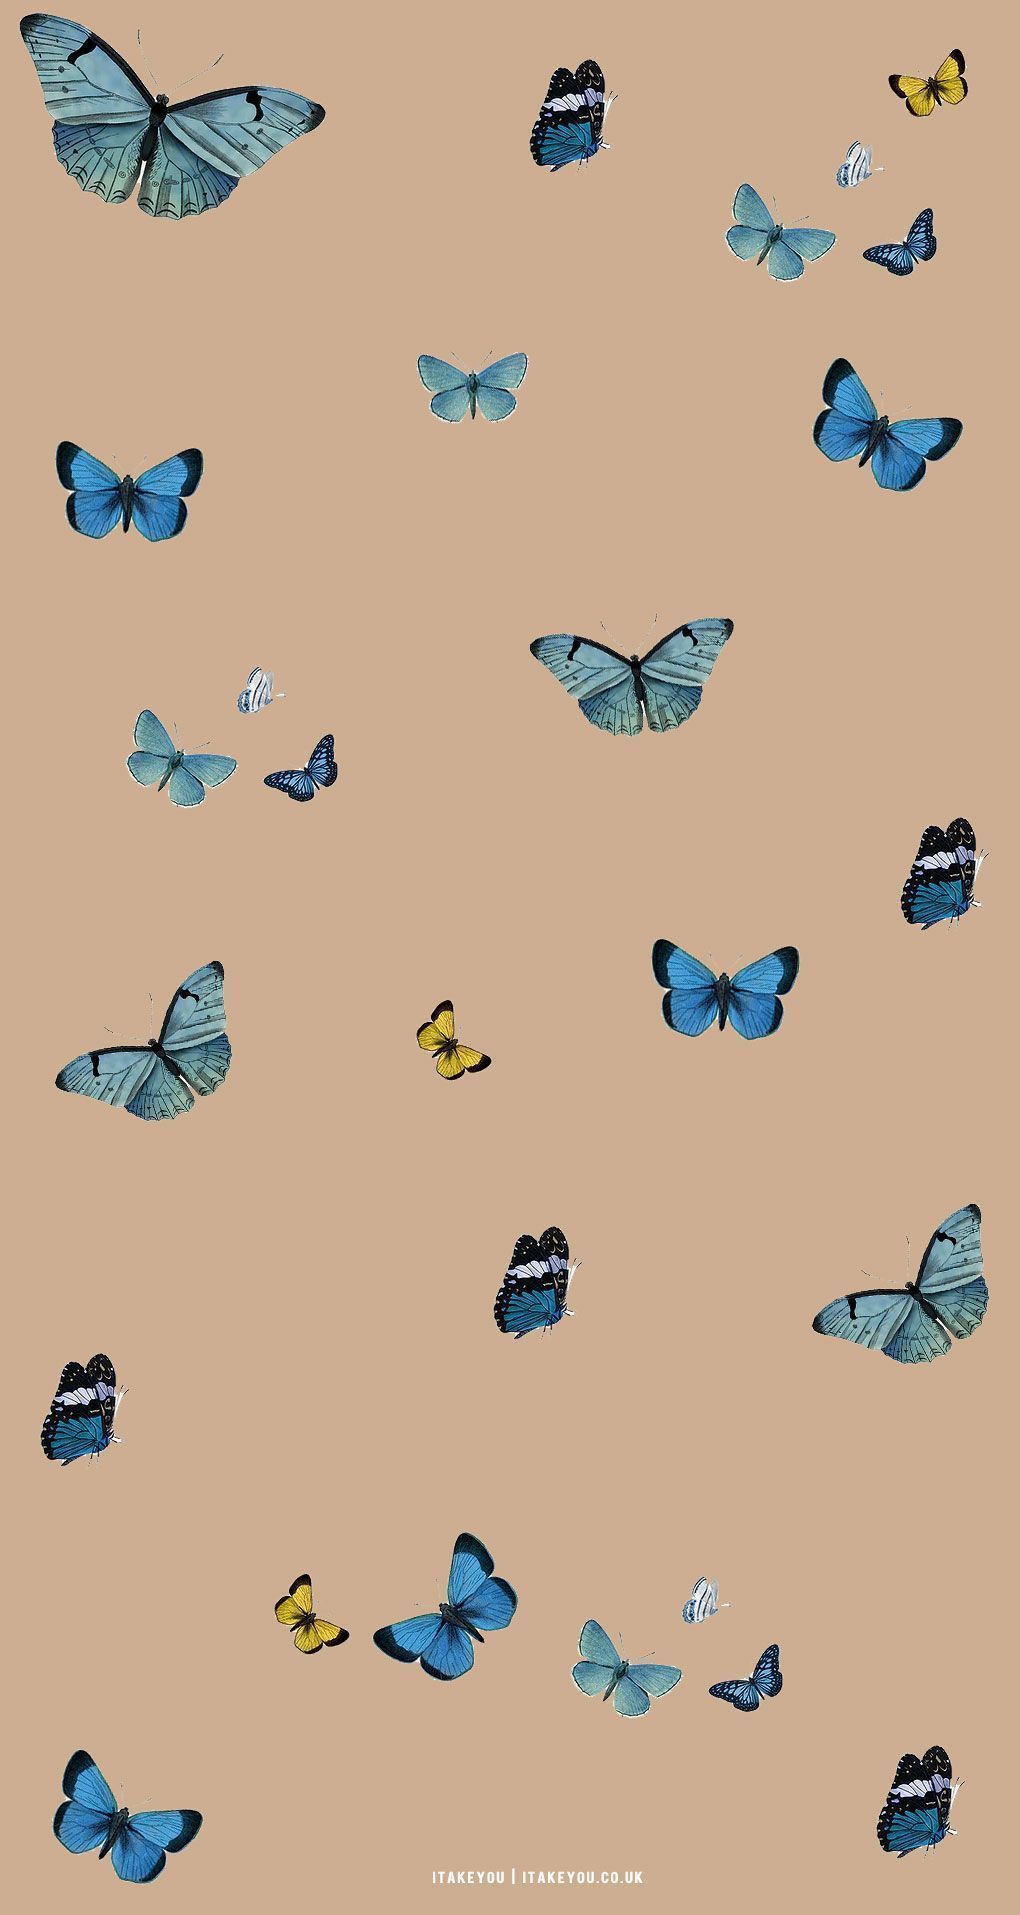 A pattern of many different butterflies on beige - Smile, December, wedding, cute, butterfly, pretty, iPhone, light brown, cool, ghost